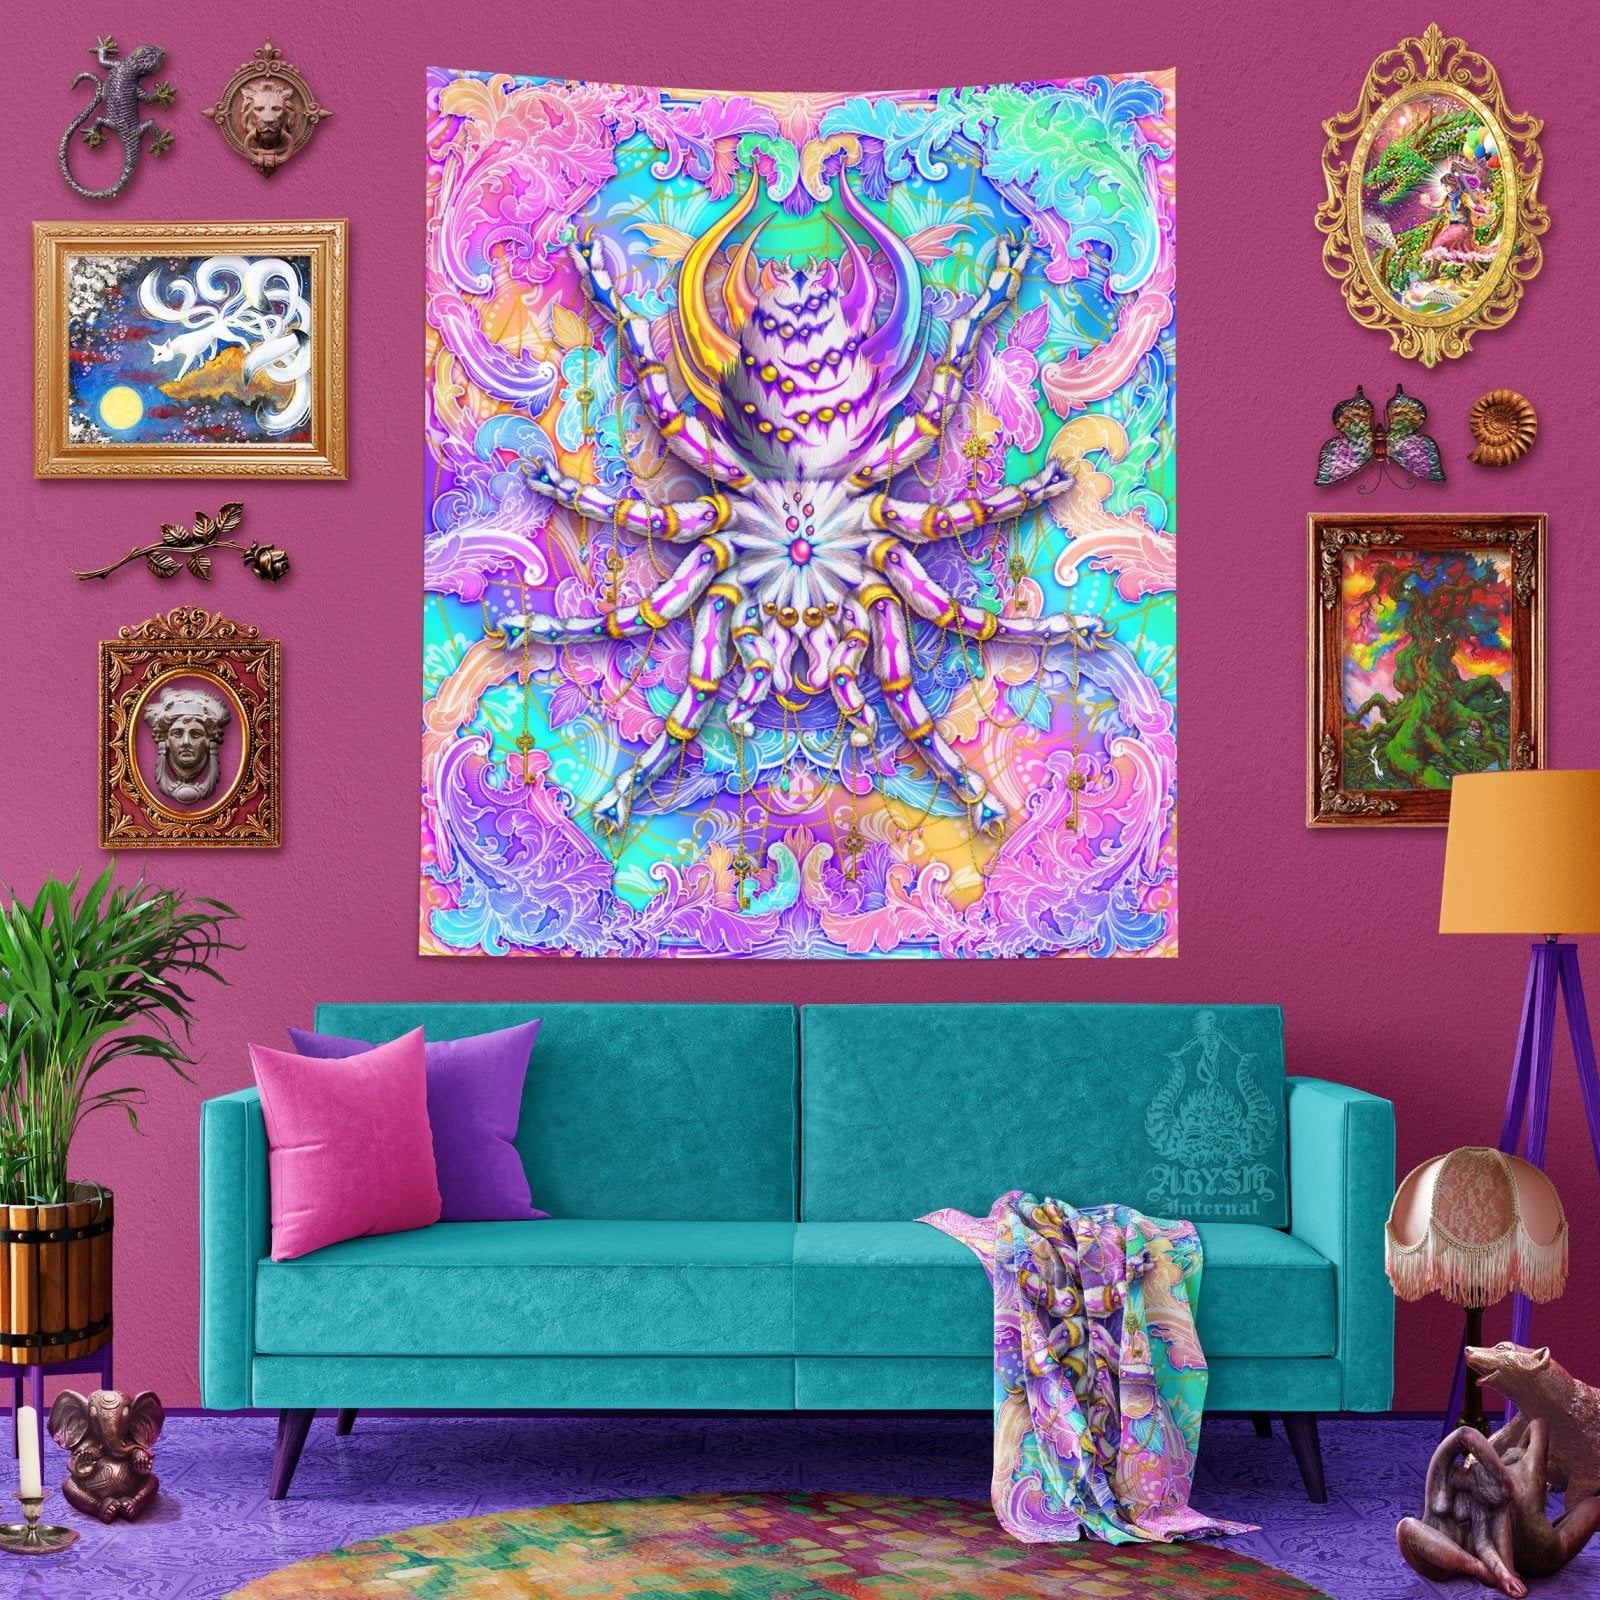 Aesthetic Tapestry, Psychedelic Wall Hanging, Indie Home Decor, Tarantula Art Print, Eclectic and Funky - Holographic Pastel Spider - Abysm Internal